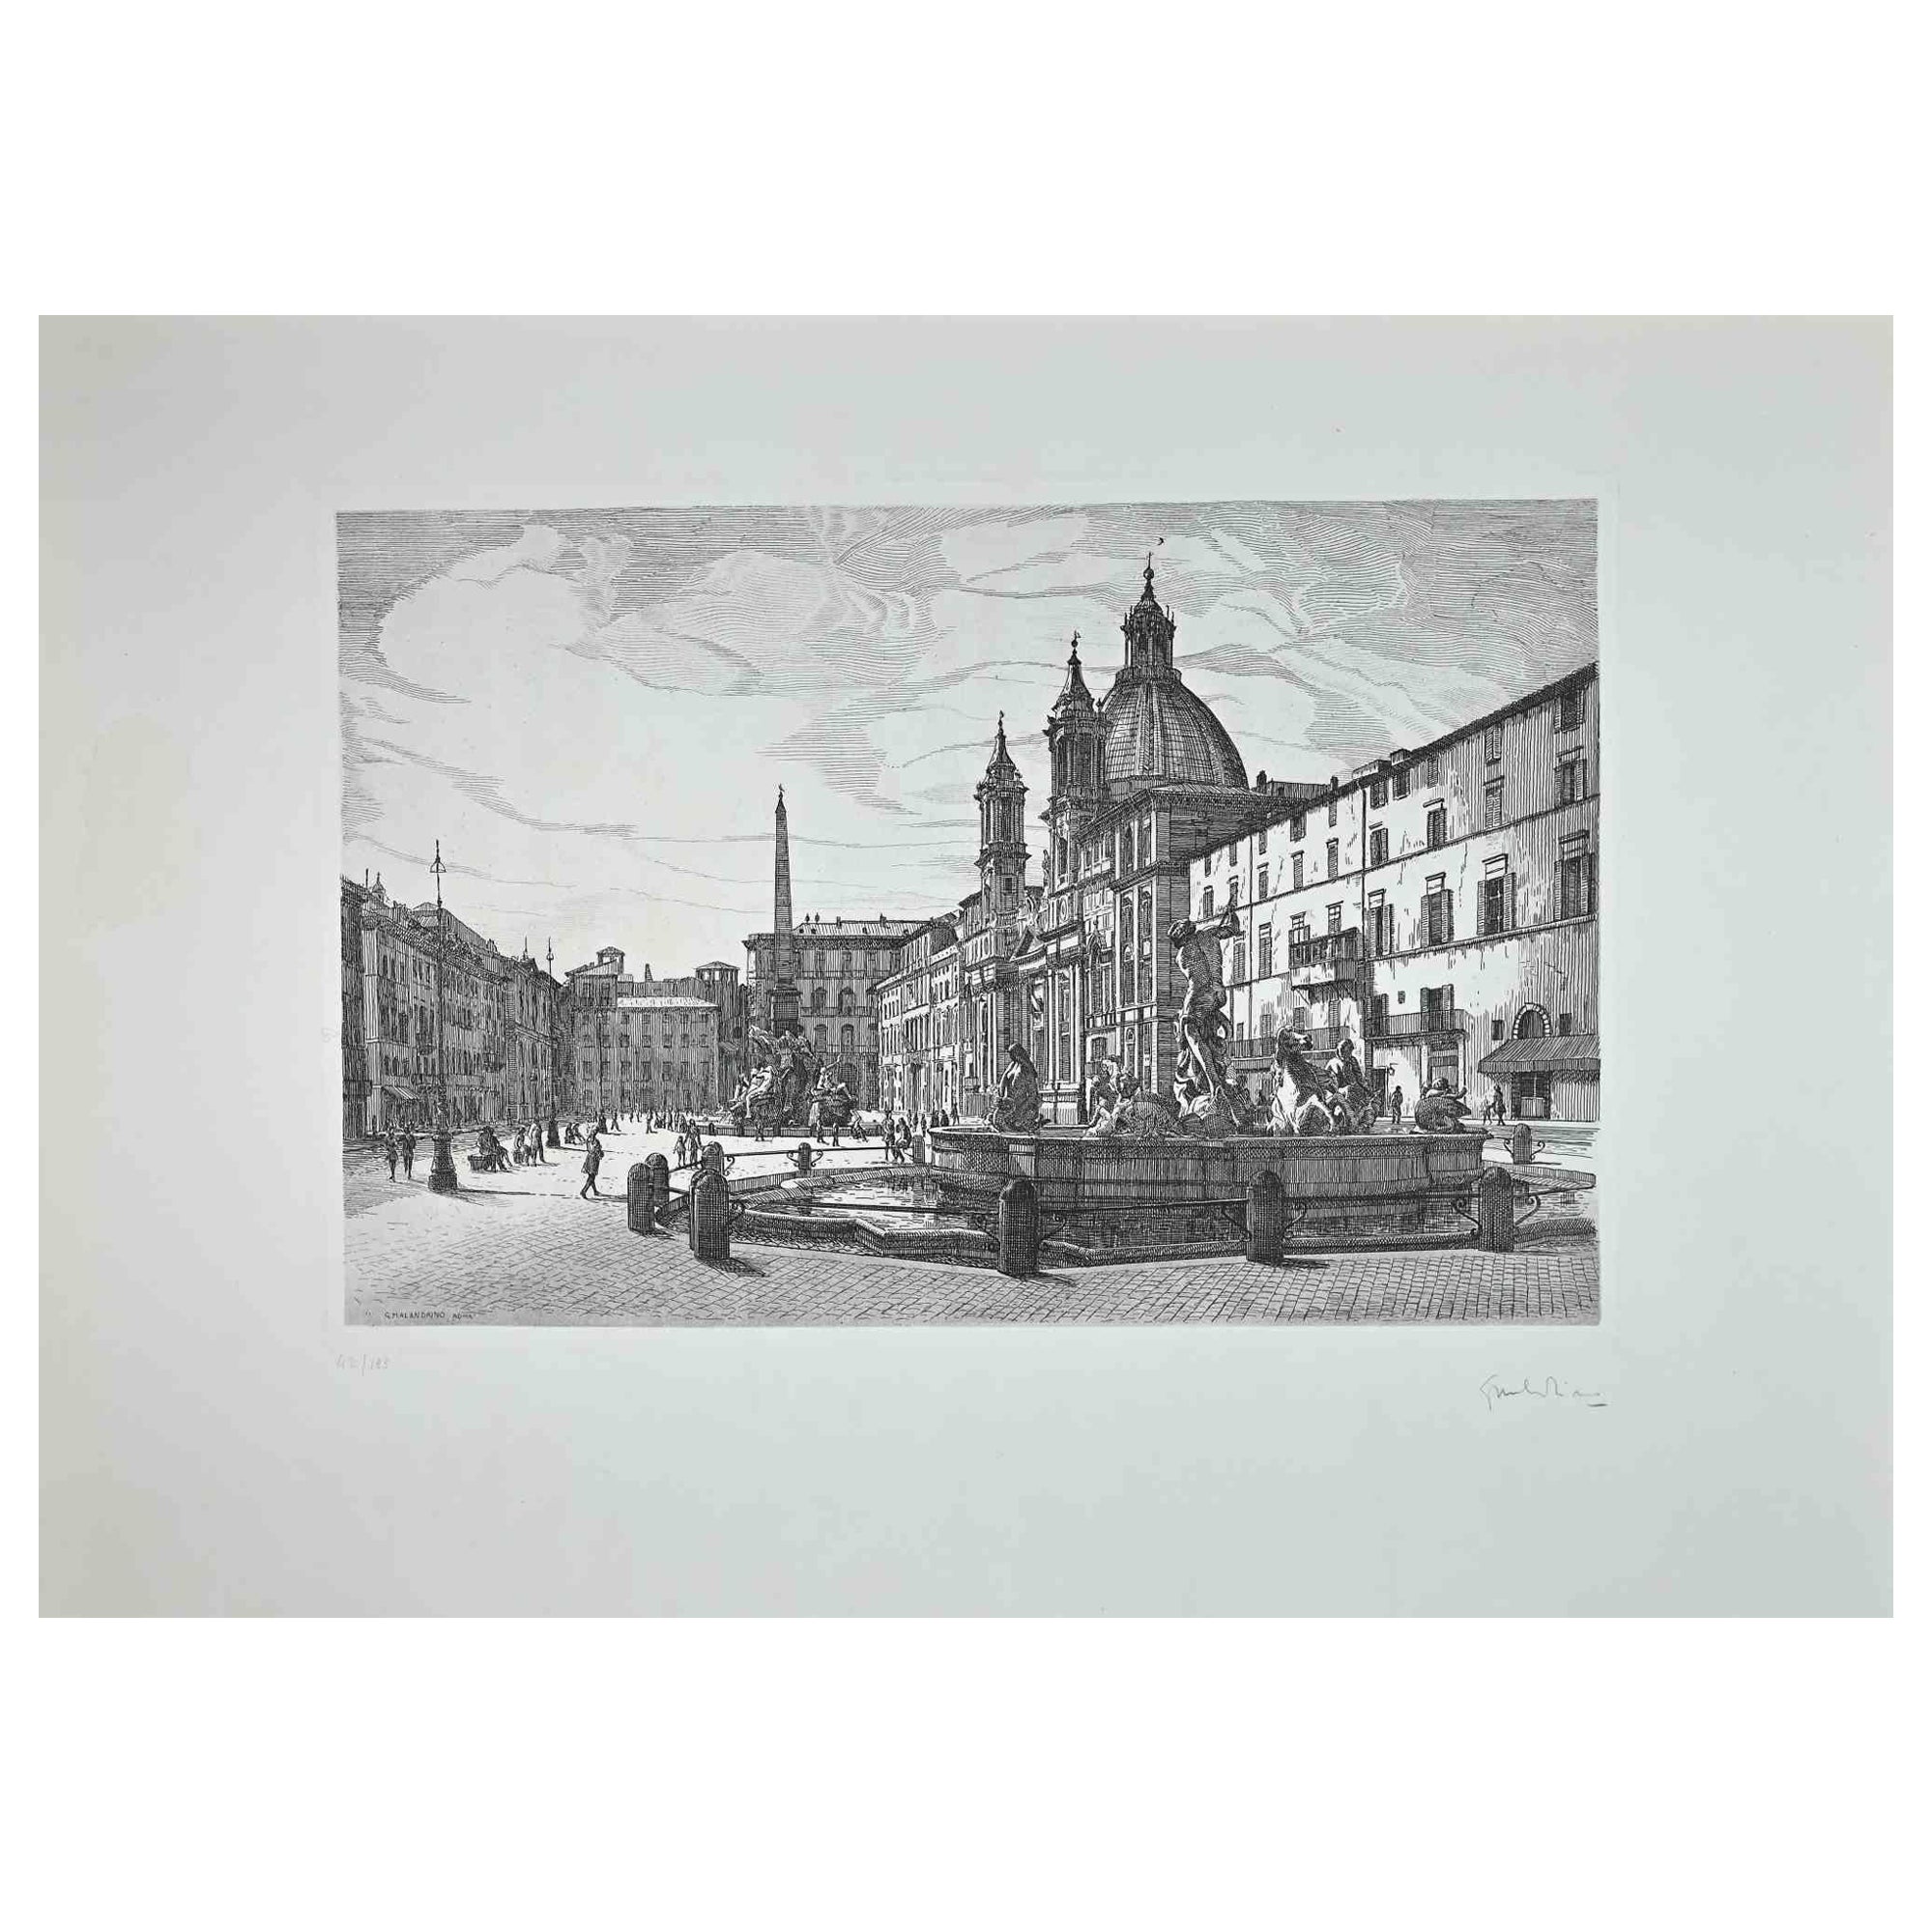 View of Piazza Navona is an original contemporary artwork realized in 1970 by the Italian artist Giuseppe Malandrino  (Modica, 1910 - Rome, 1979).
 
Etching on cardboard.
 
Hand-signed in pencil on the lower right corner.  Numbered on the lower-left